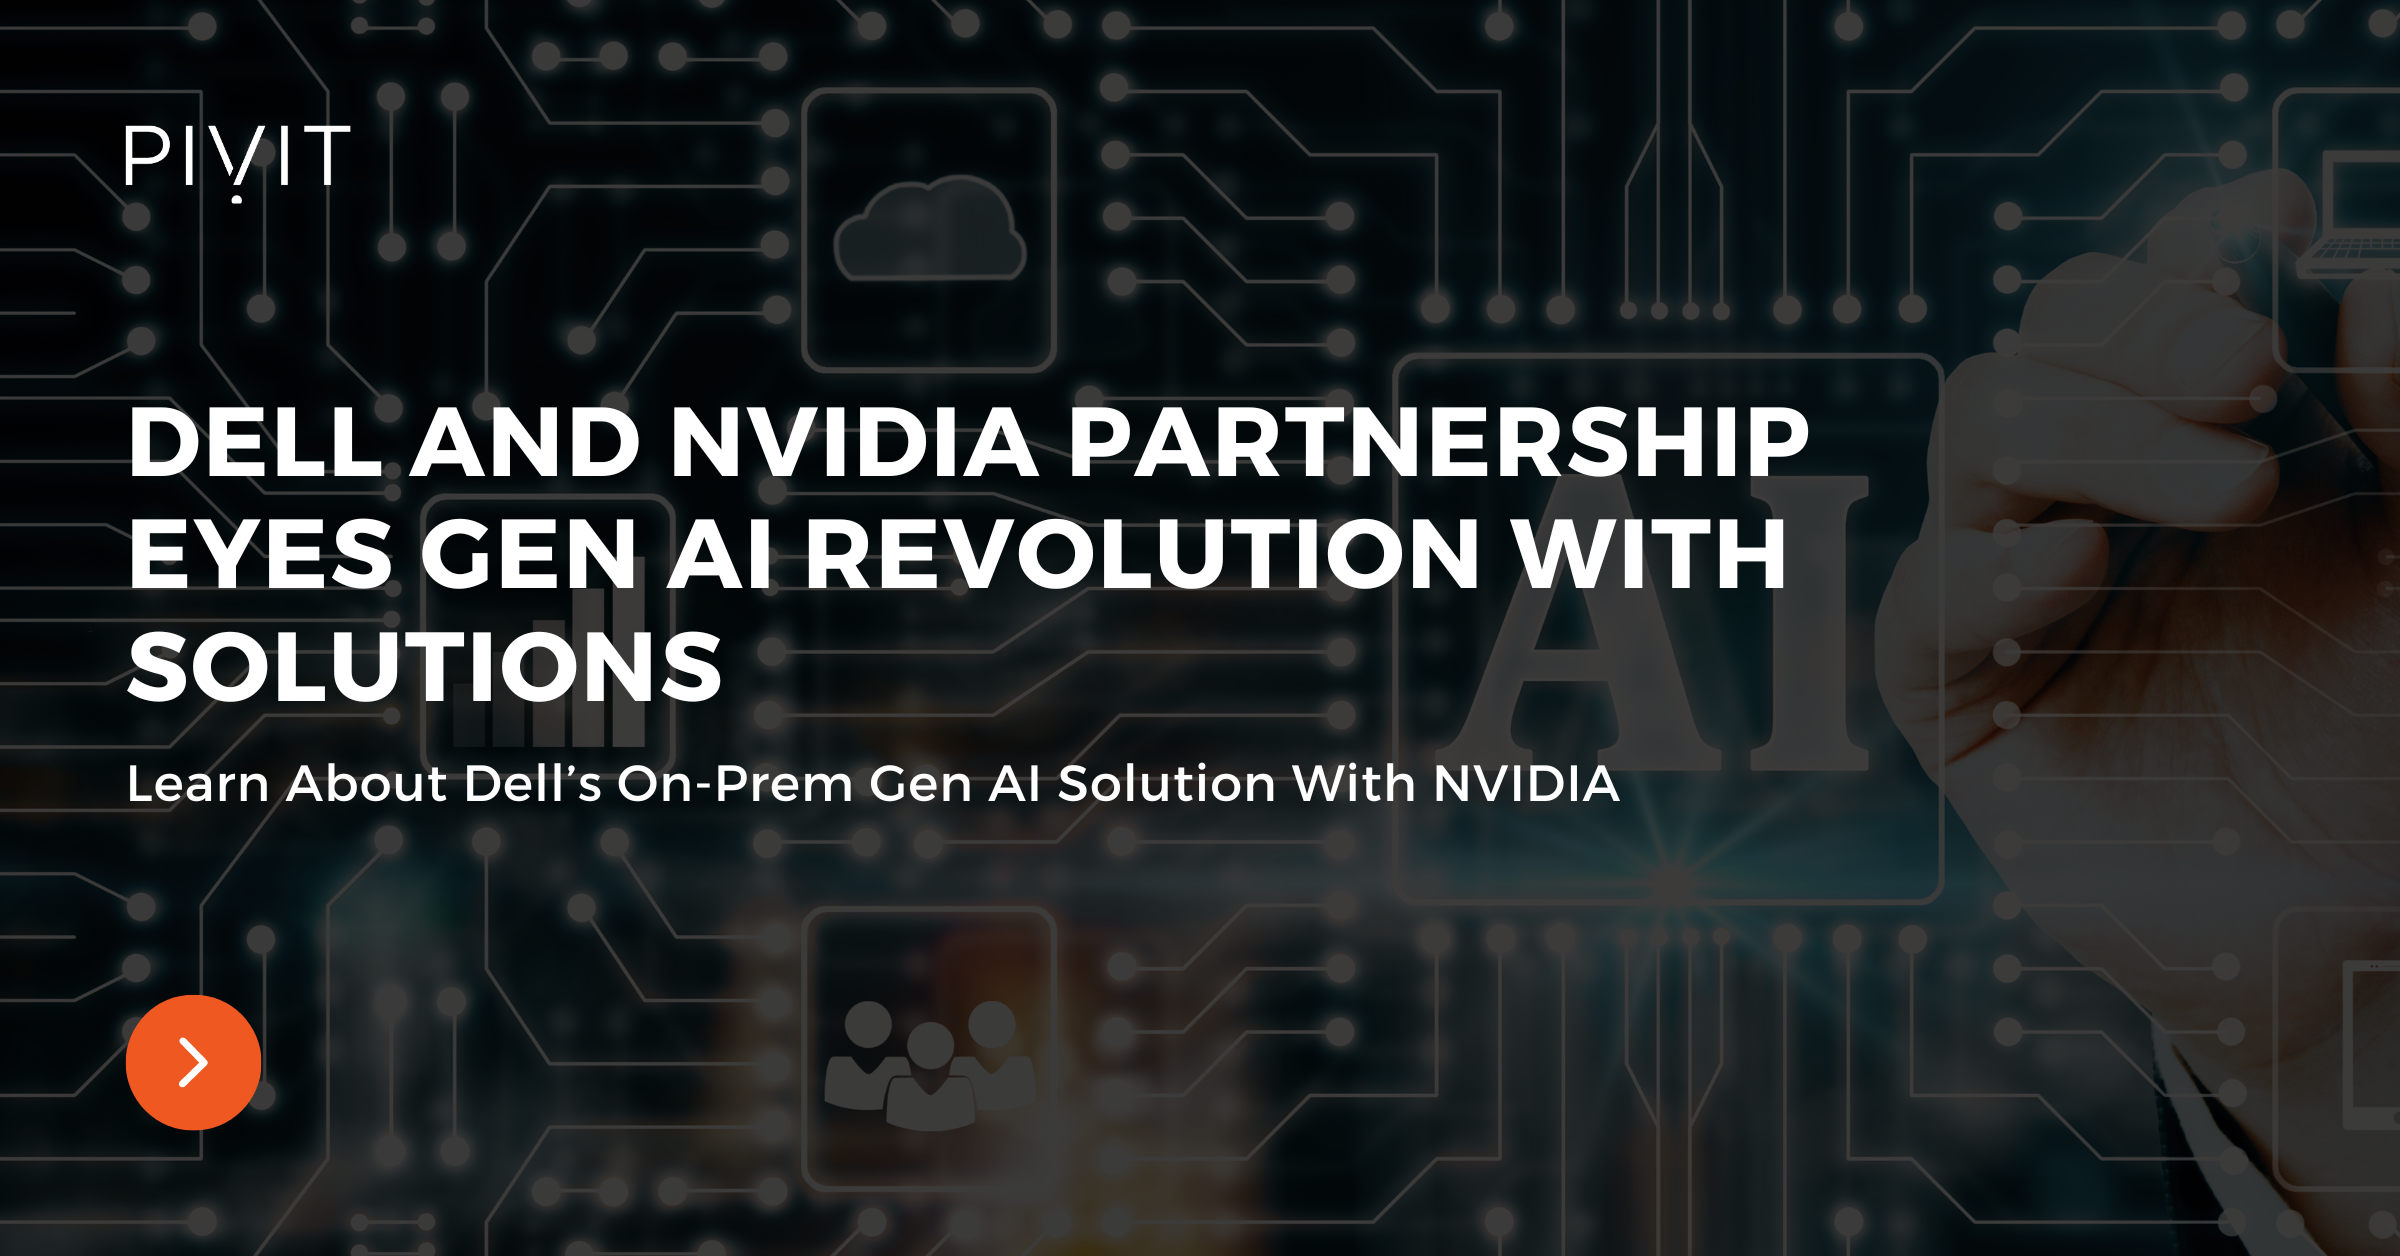 Dell and Nvidia Partnership Eyes Gen AI Revolution With Solutions - Learn About Dell’s On-Prem Gen AI Solution With NVIDIA